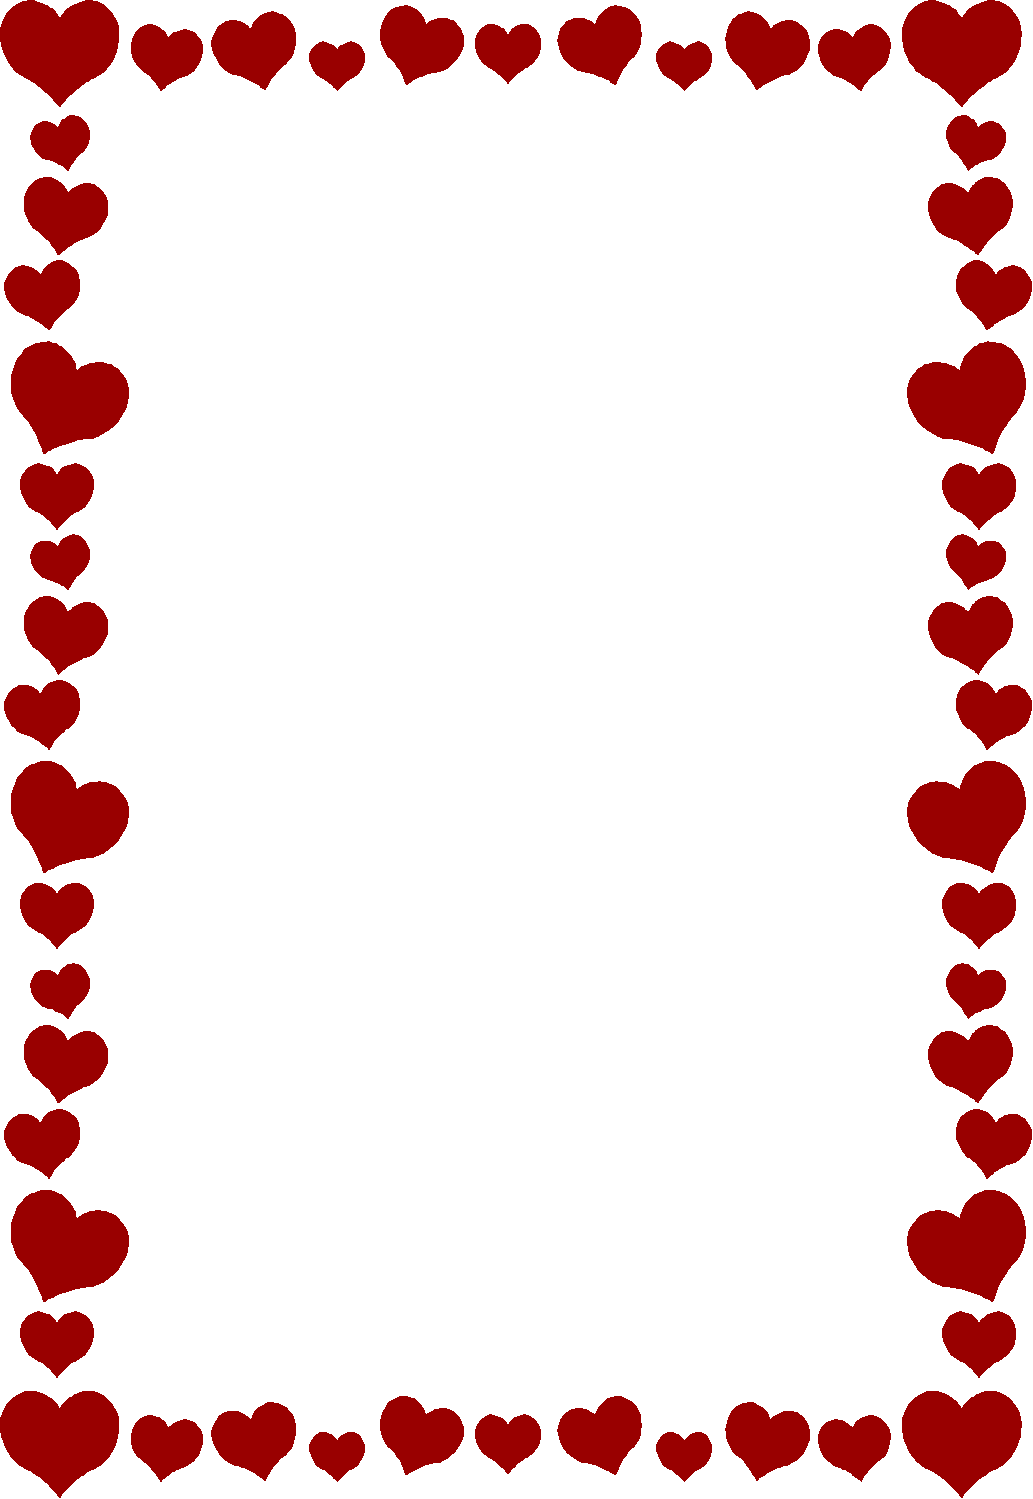 Clip Art Hearts Valentine S Day | Clipart Panda - Free Clipart Images